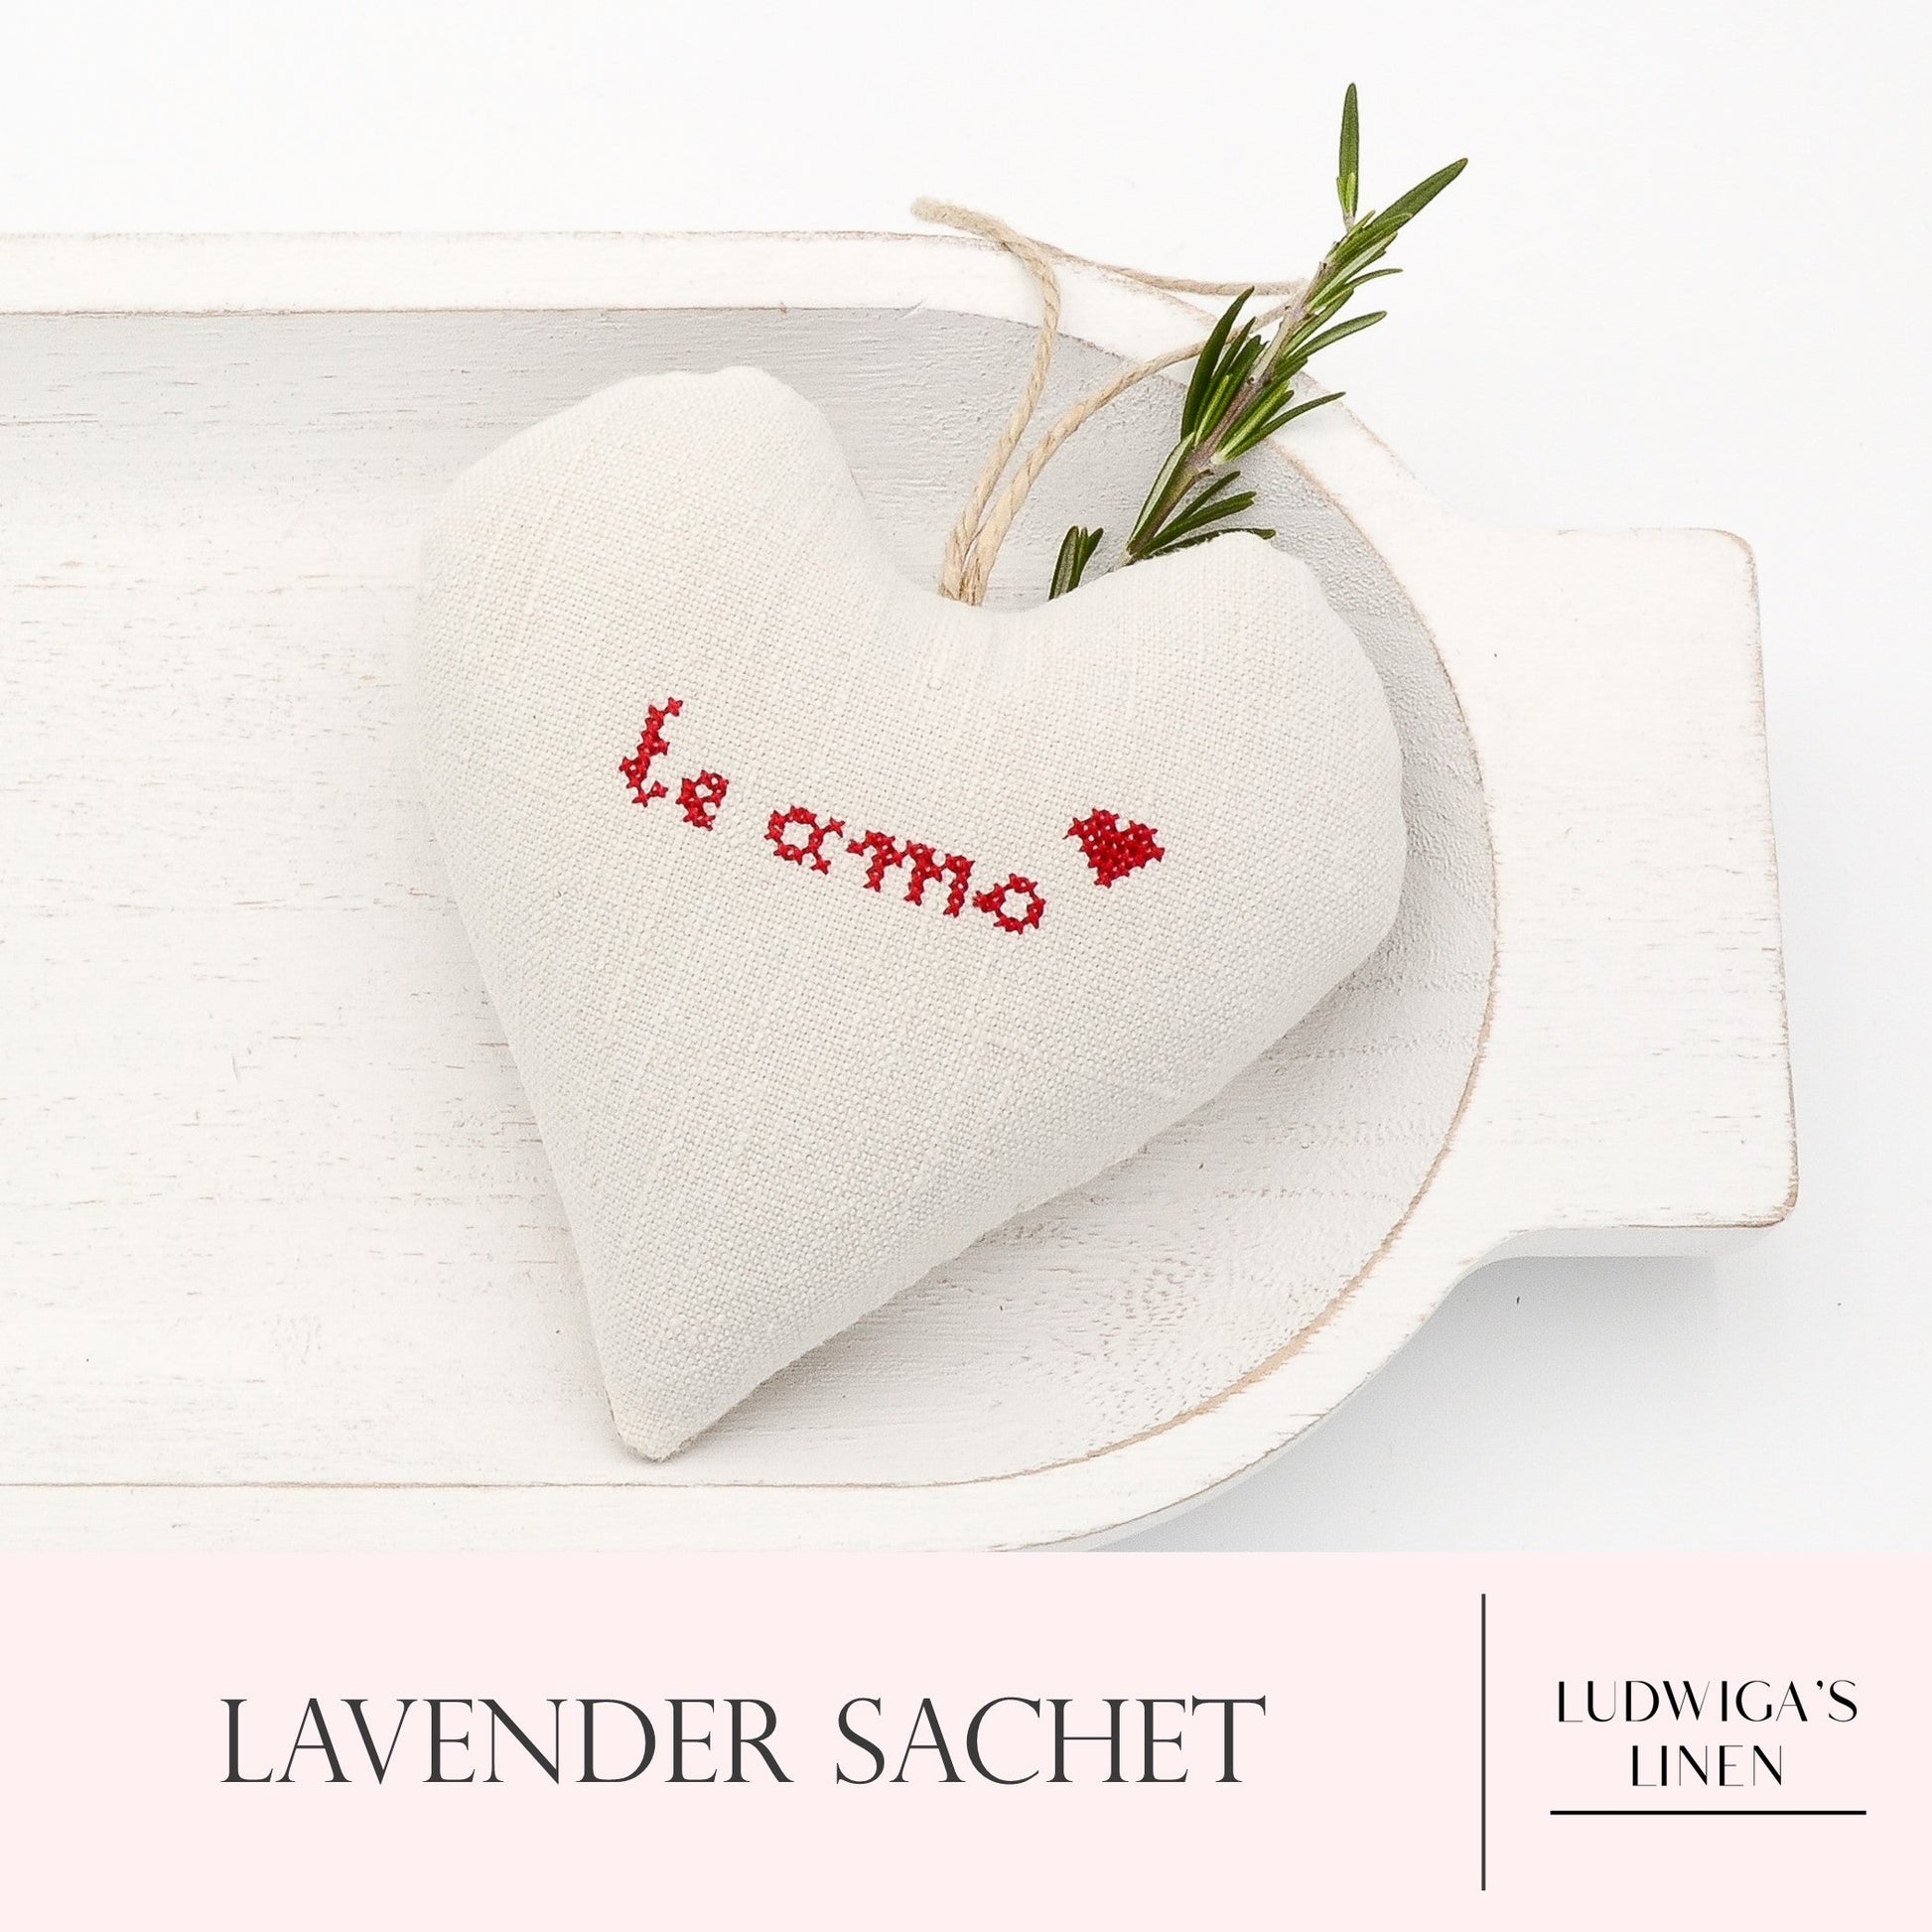 Antique/vintage European white linen lavender sachet heart with "te amo" embroidered in red, hemp twine tie and filled with high quality lavender from Provence France